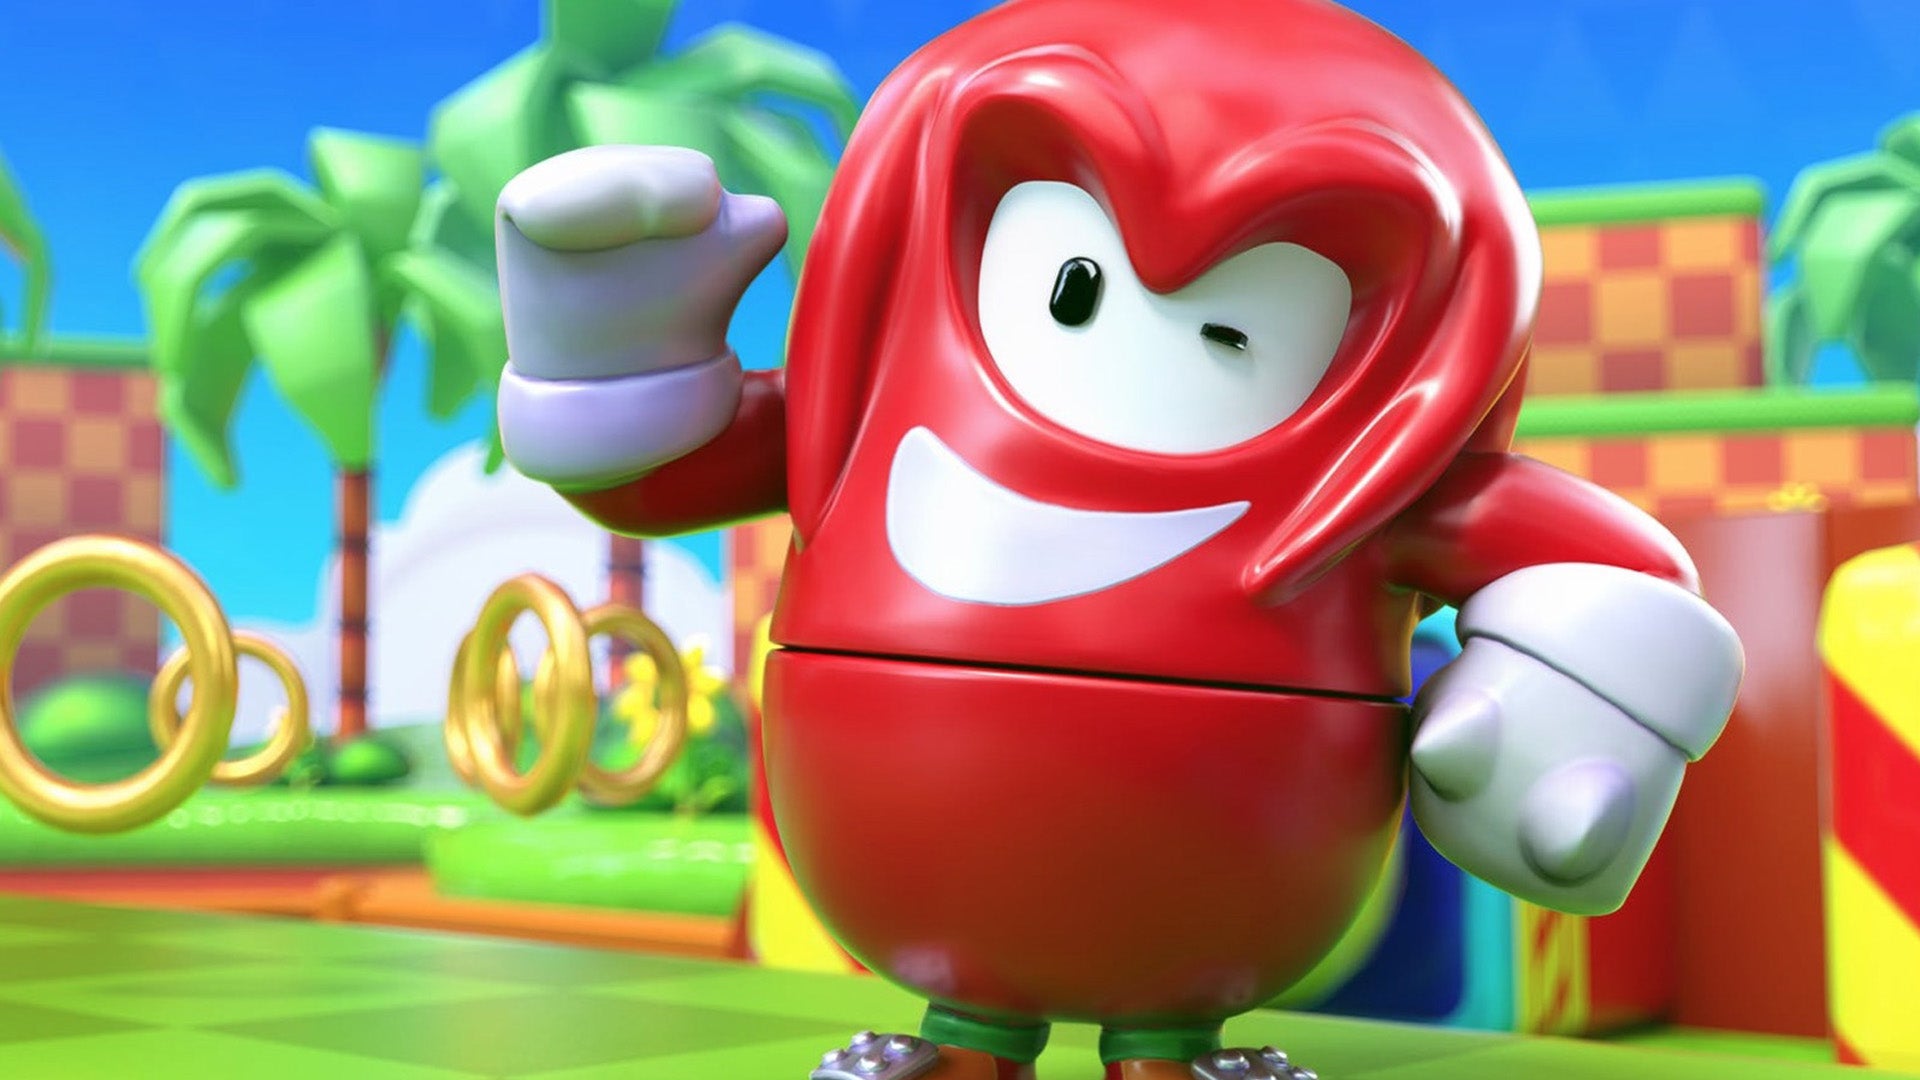 Promo art for Fall Guys showing a Knuckles the Echidna costume on one of the beans.